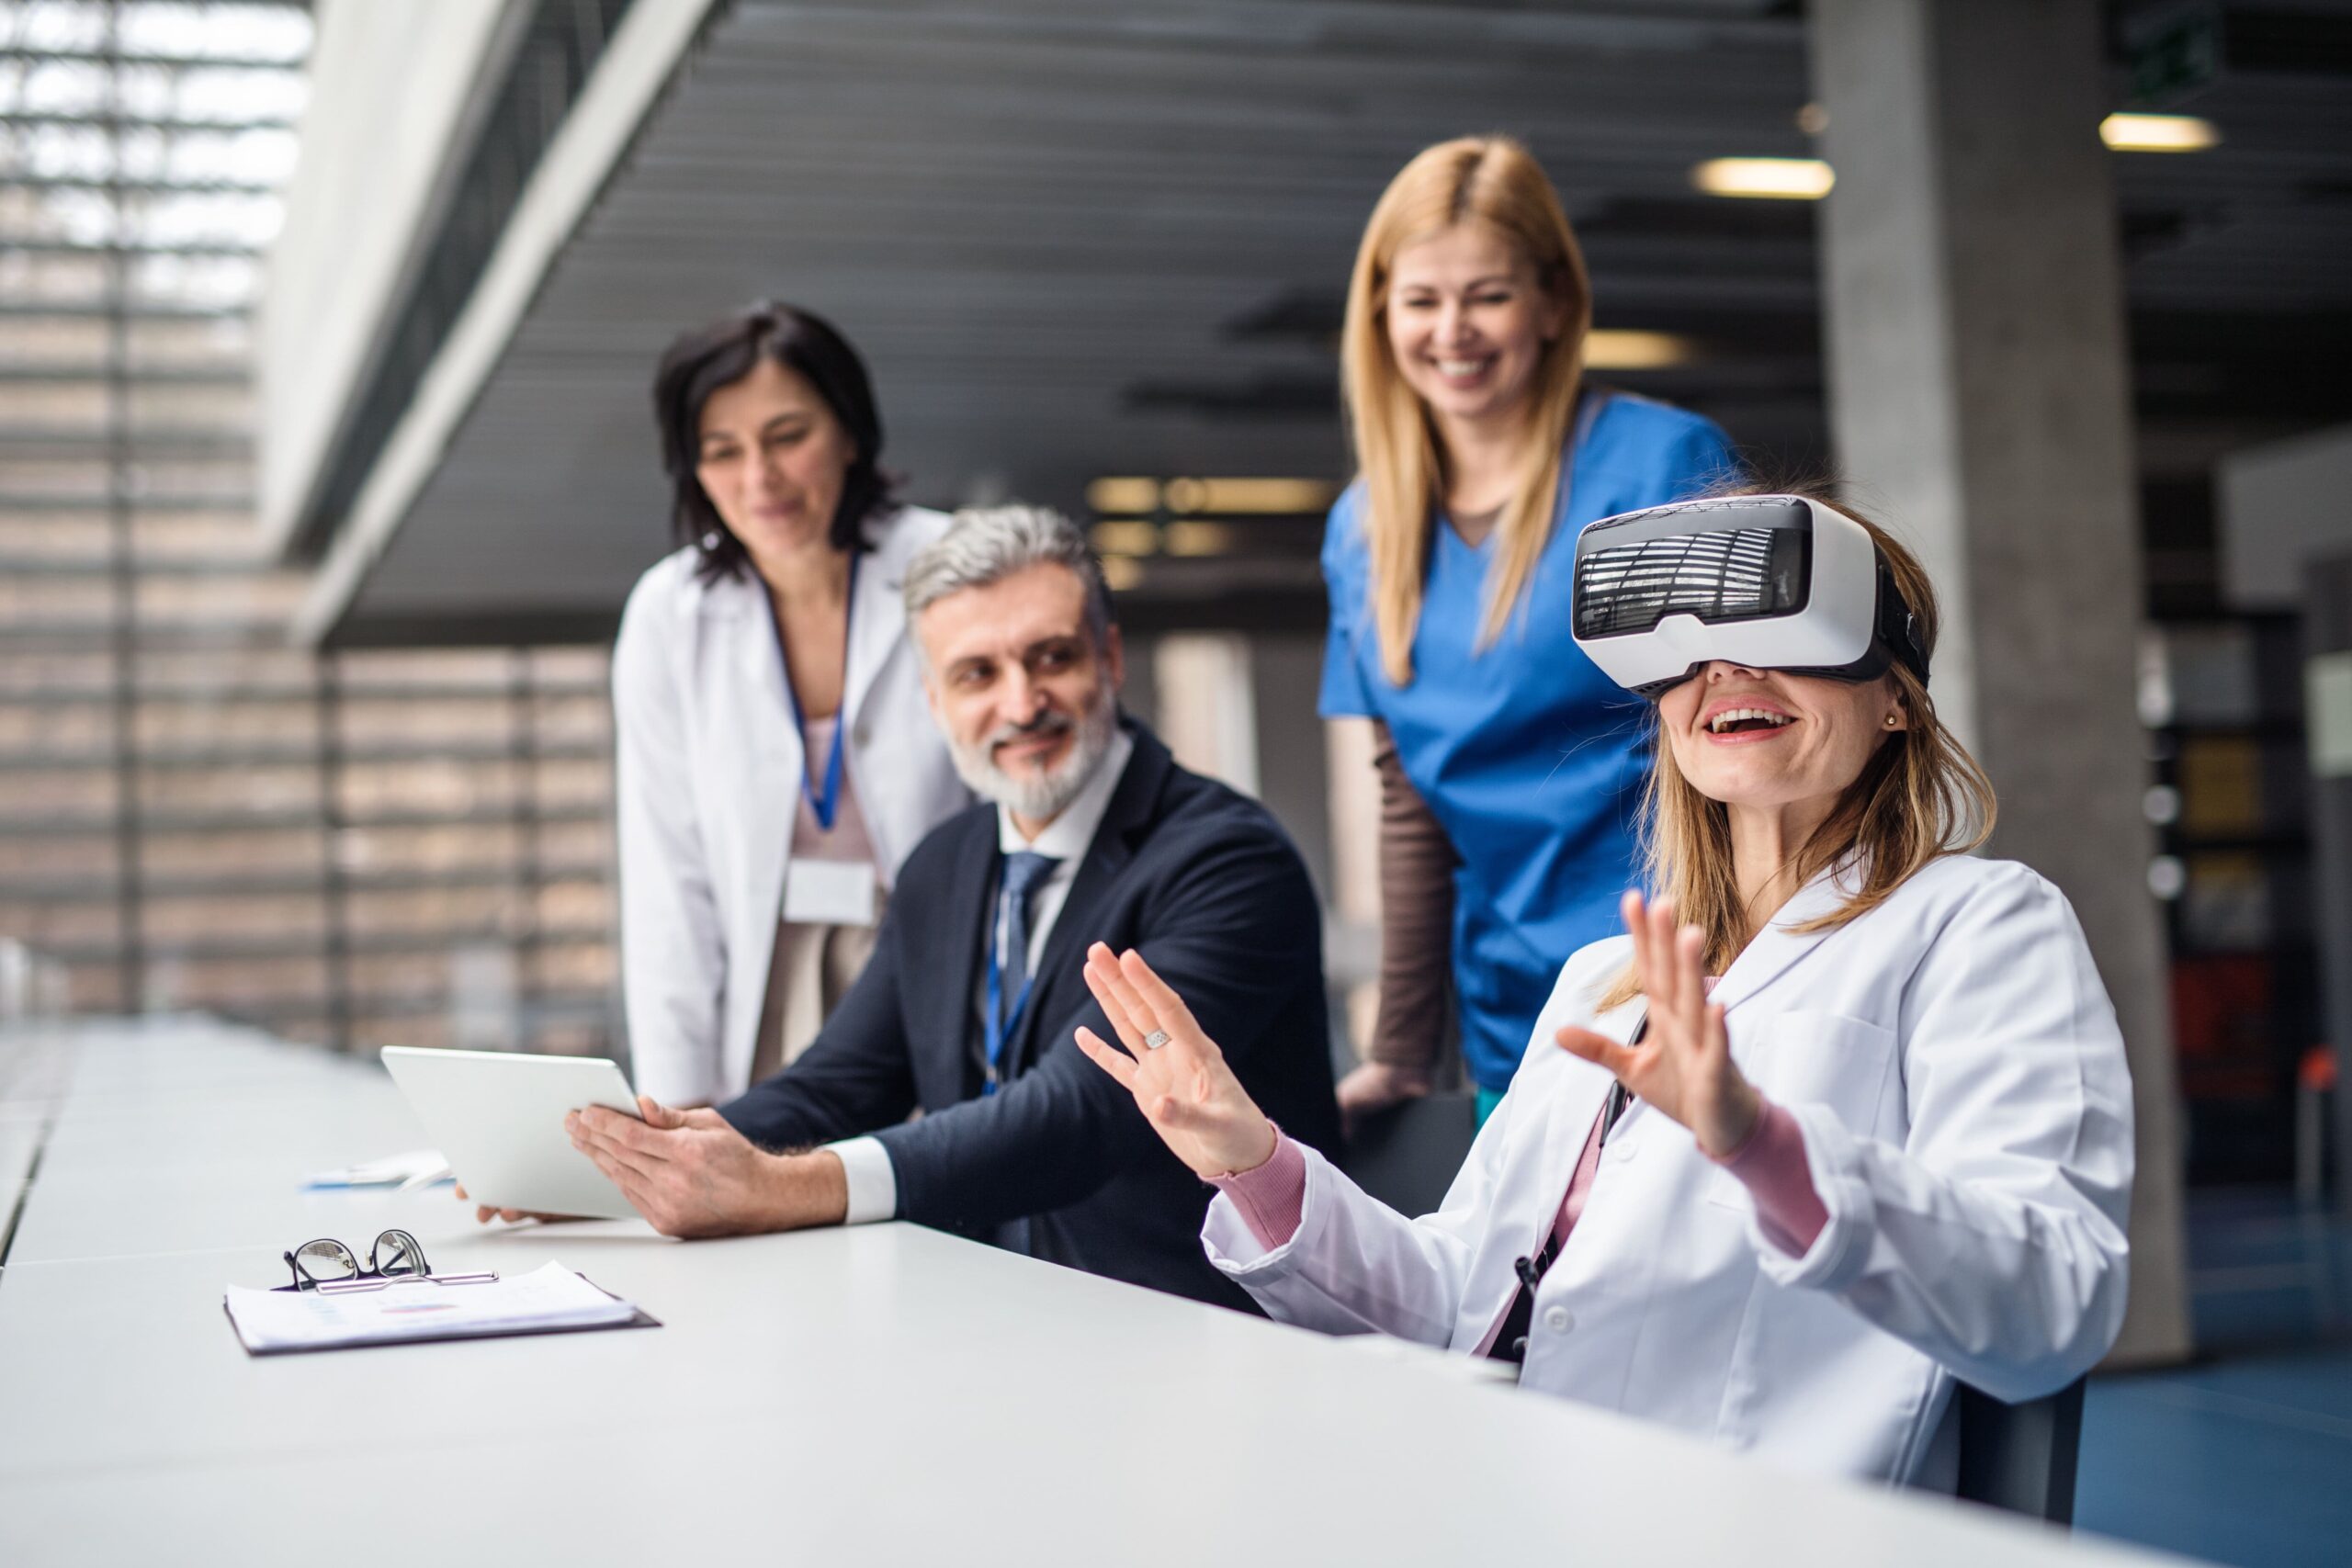 Medical providers sitting at a desk and using a VR headset